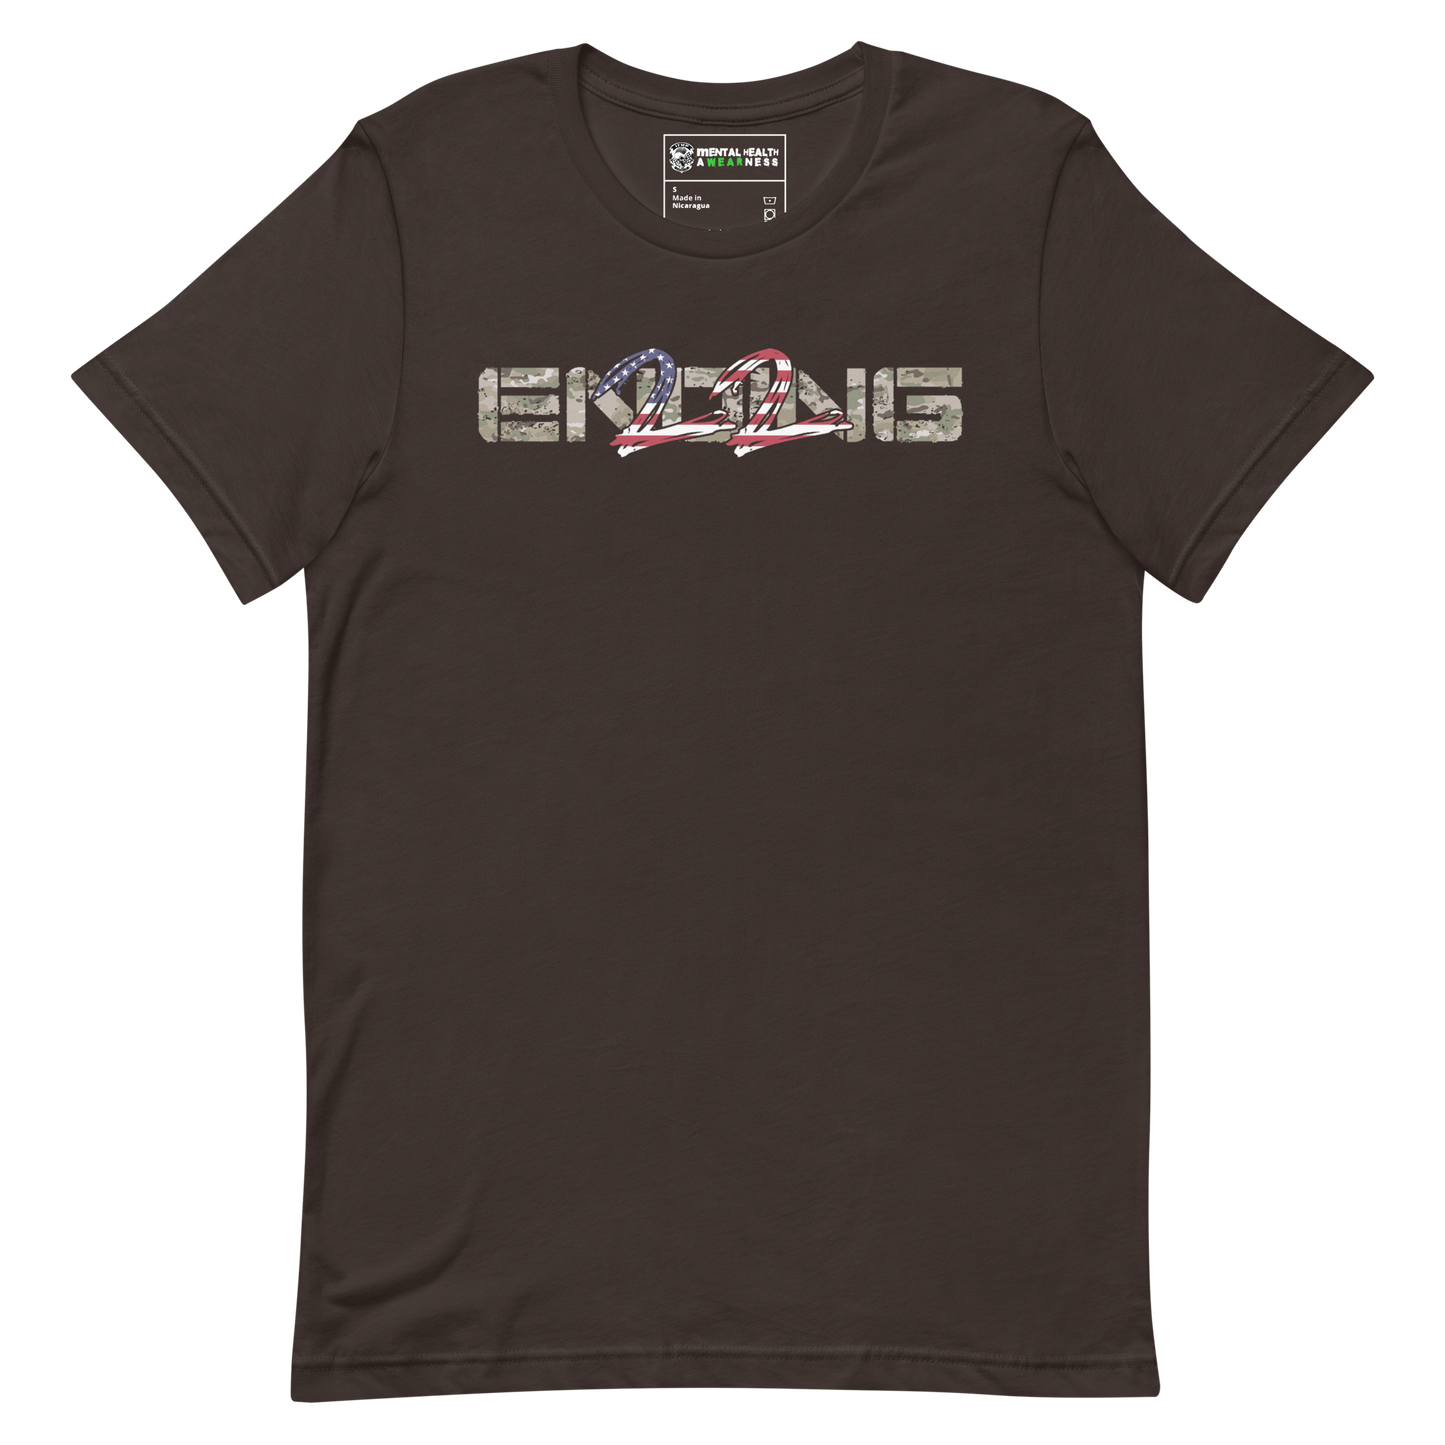 ENDING 22 Army "Grunt" Edition Brown T-Shirt Front